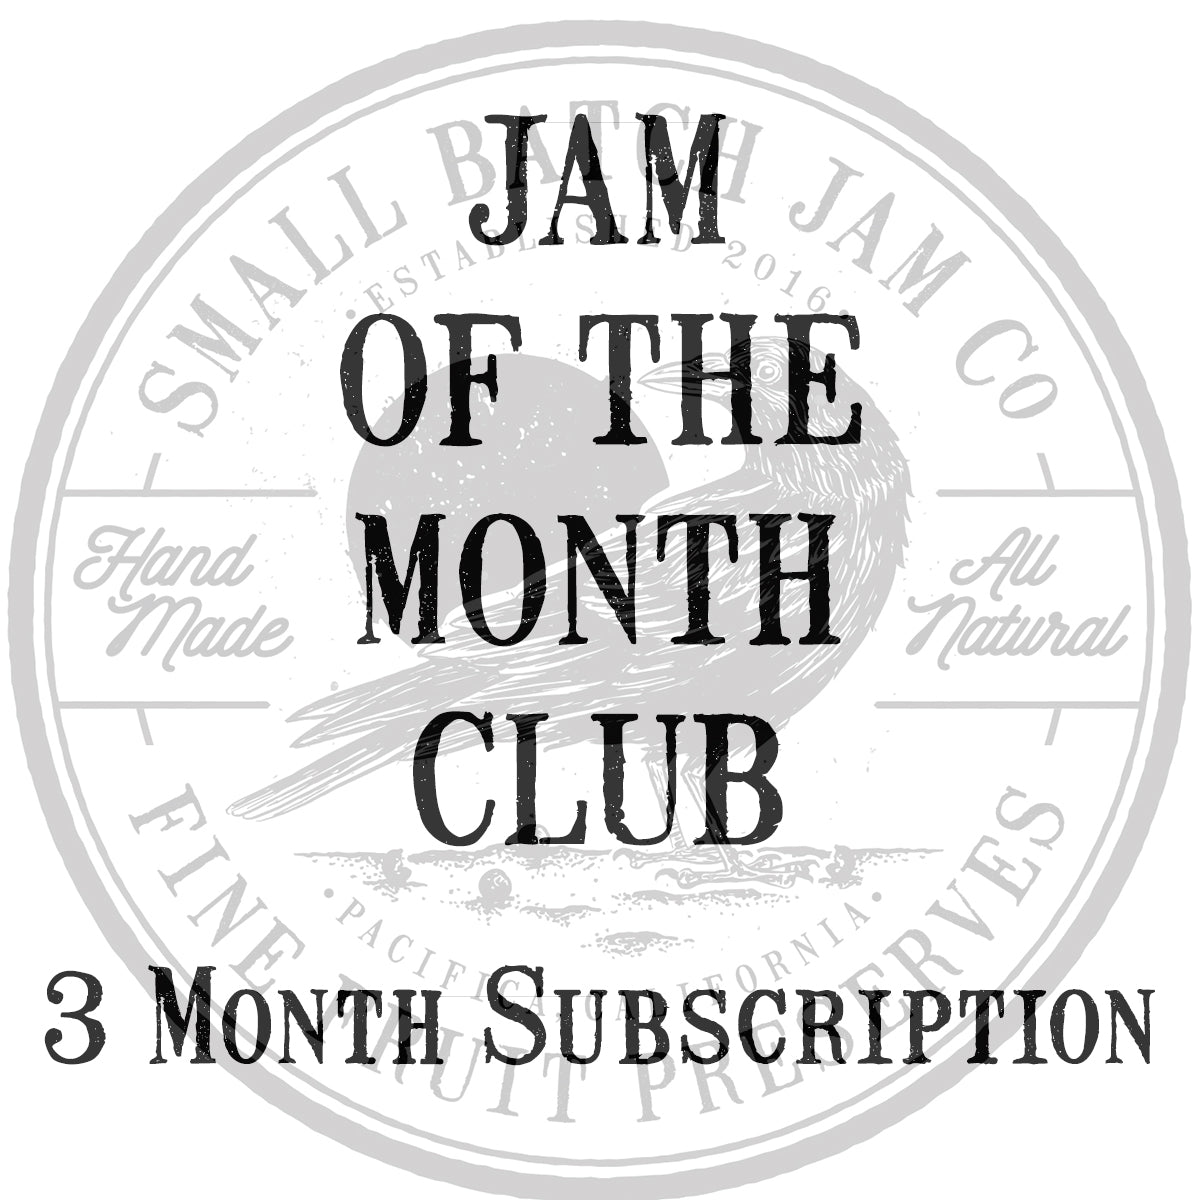 Jam Of The Month Club - 3 Month Subscription - Small Batch Jam Co